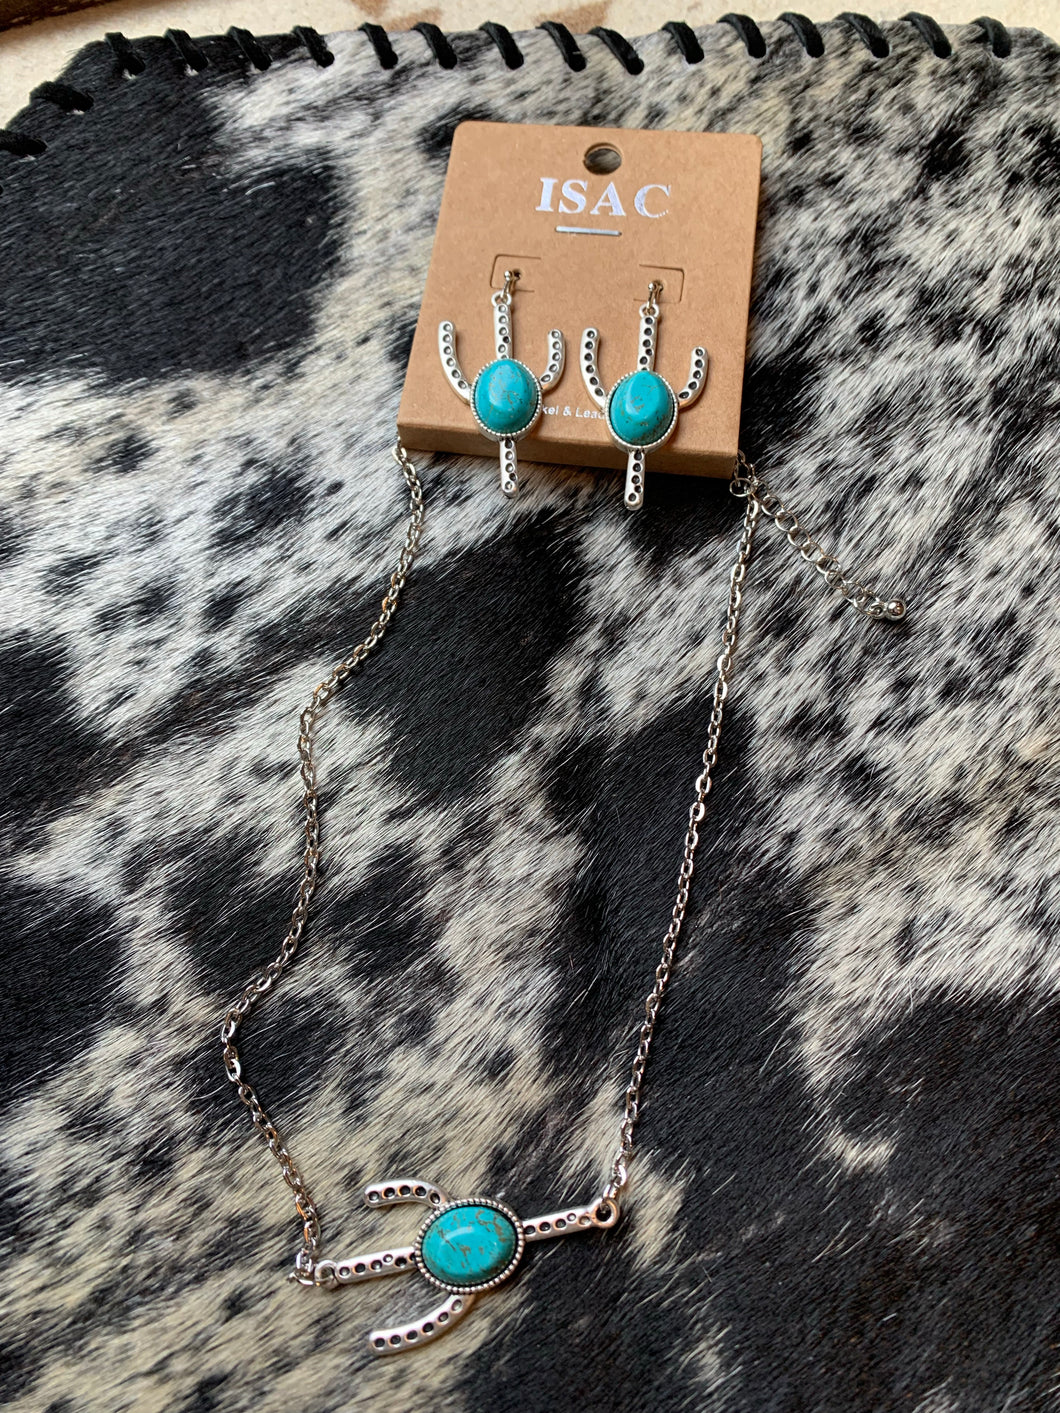 Natural turquoise cactus necklace set